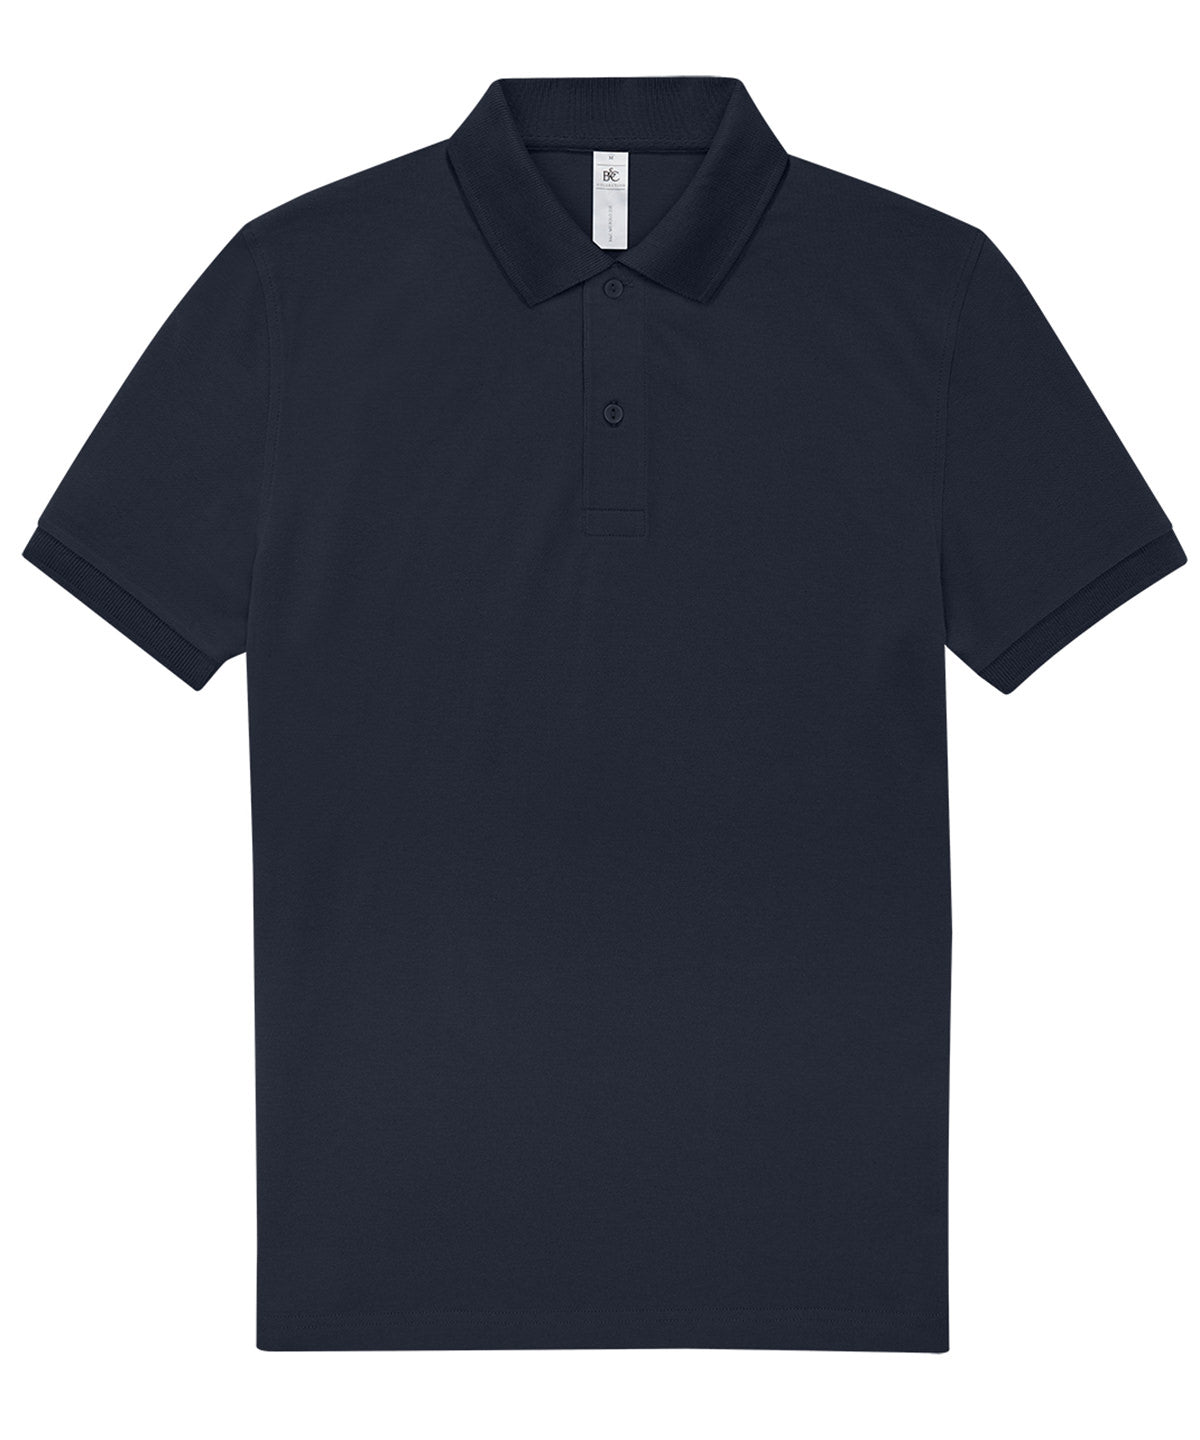 Personalised Polo Shirts - Light Grey B&C Collection B&C My Polo 210